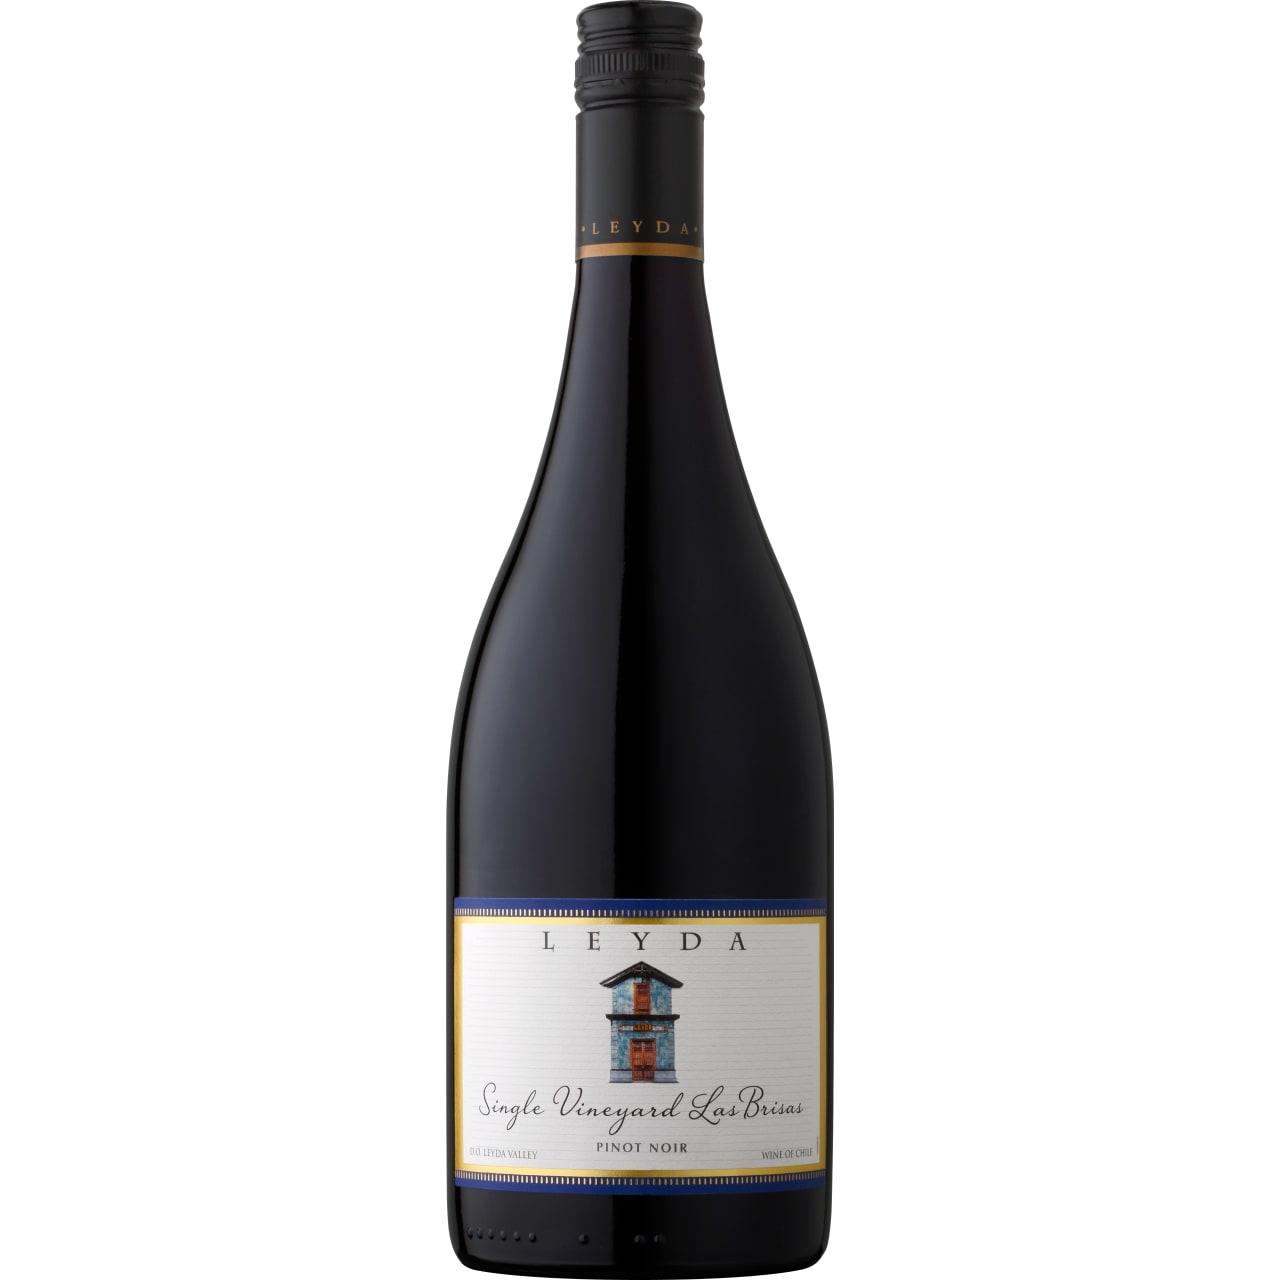 This award winning Pinot Noir has a superbly satisfying cherries and damsons fruit, with soft, well-knitted tannins on the finish.